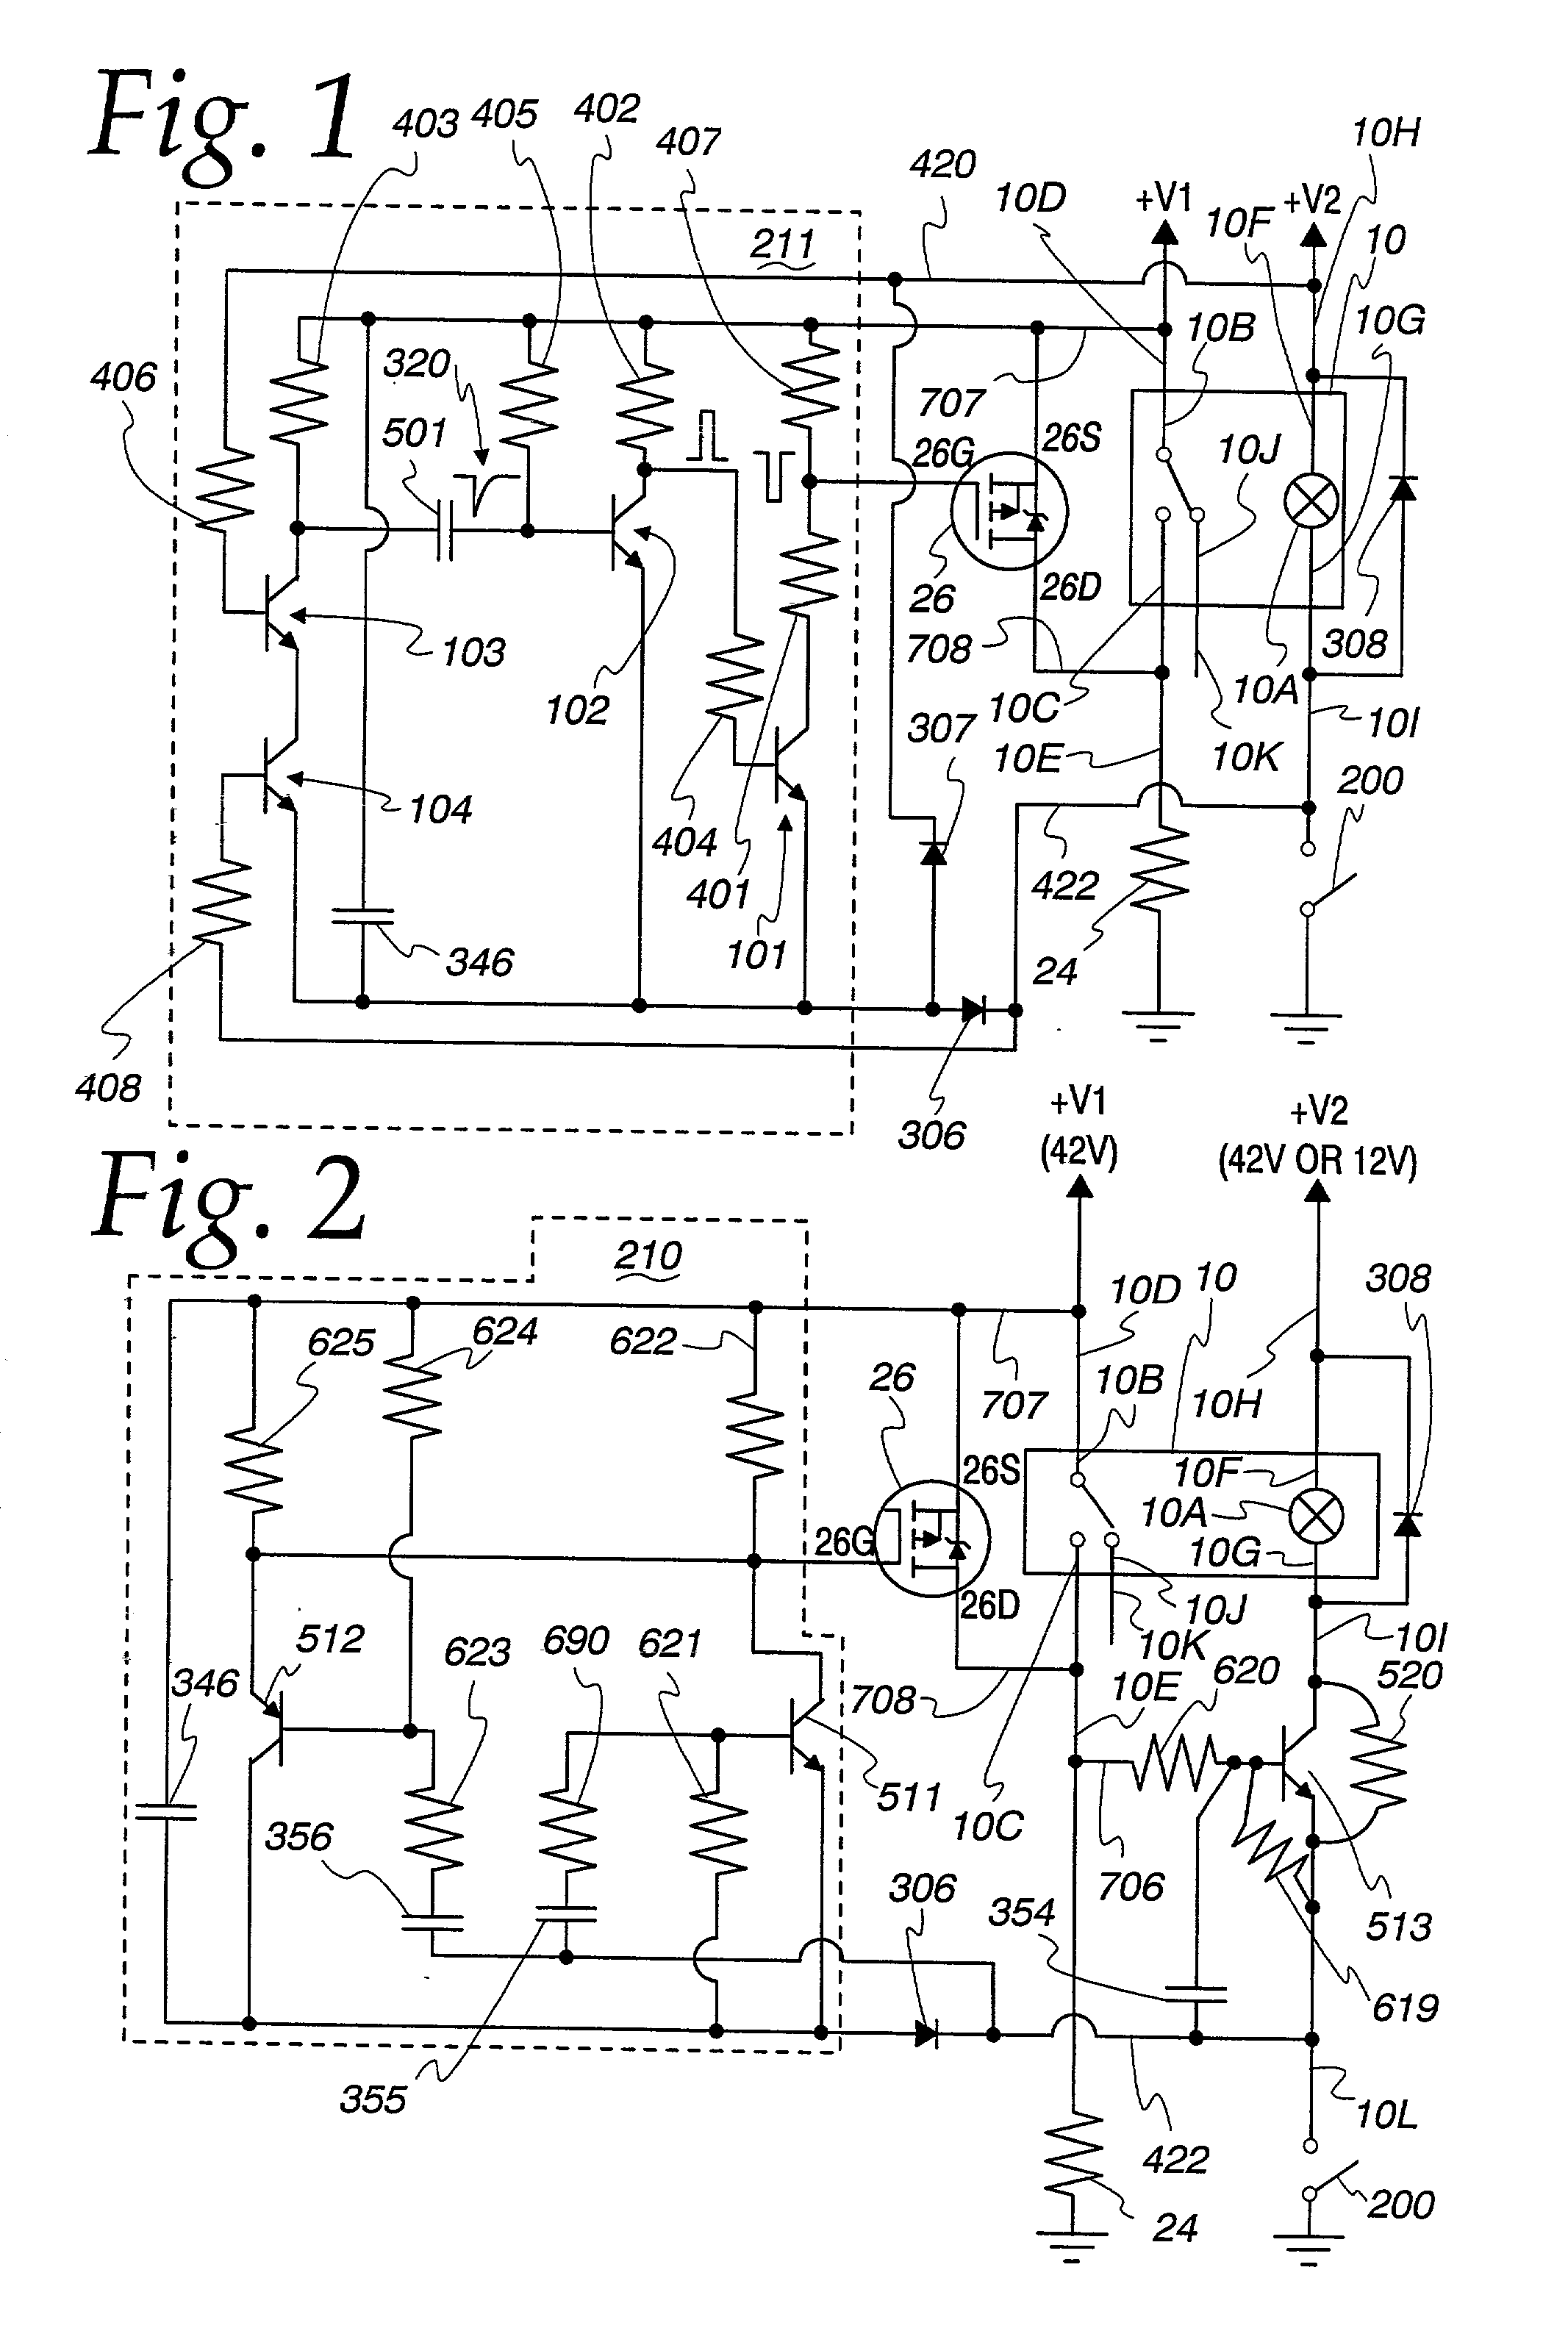 Circuit for operating voltage range extension for a relay